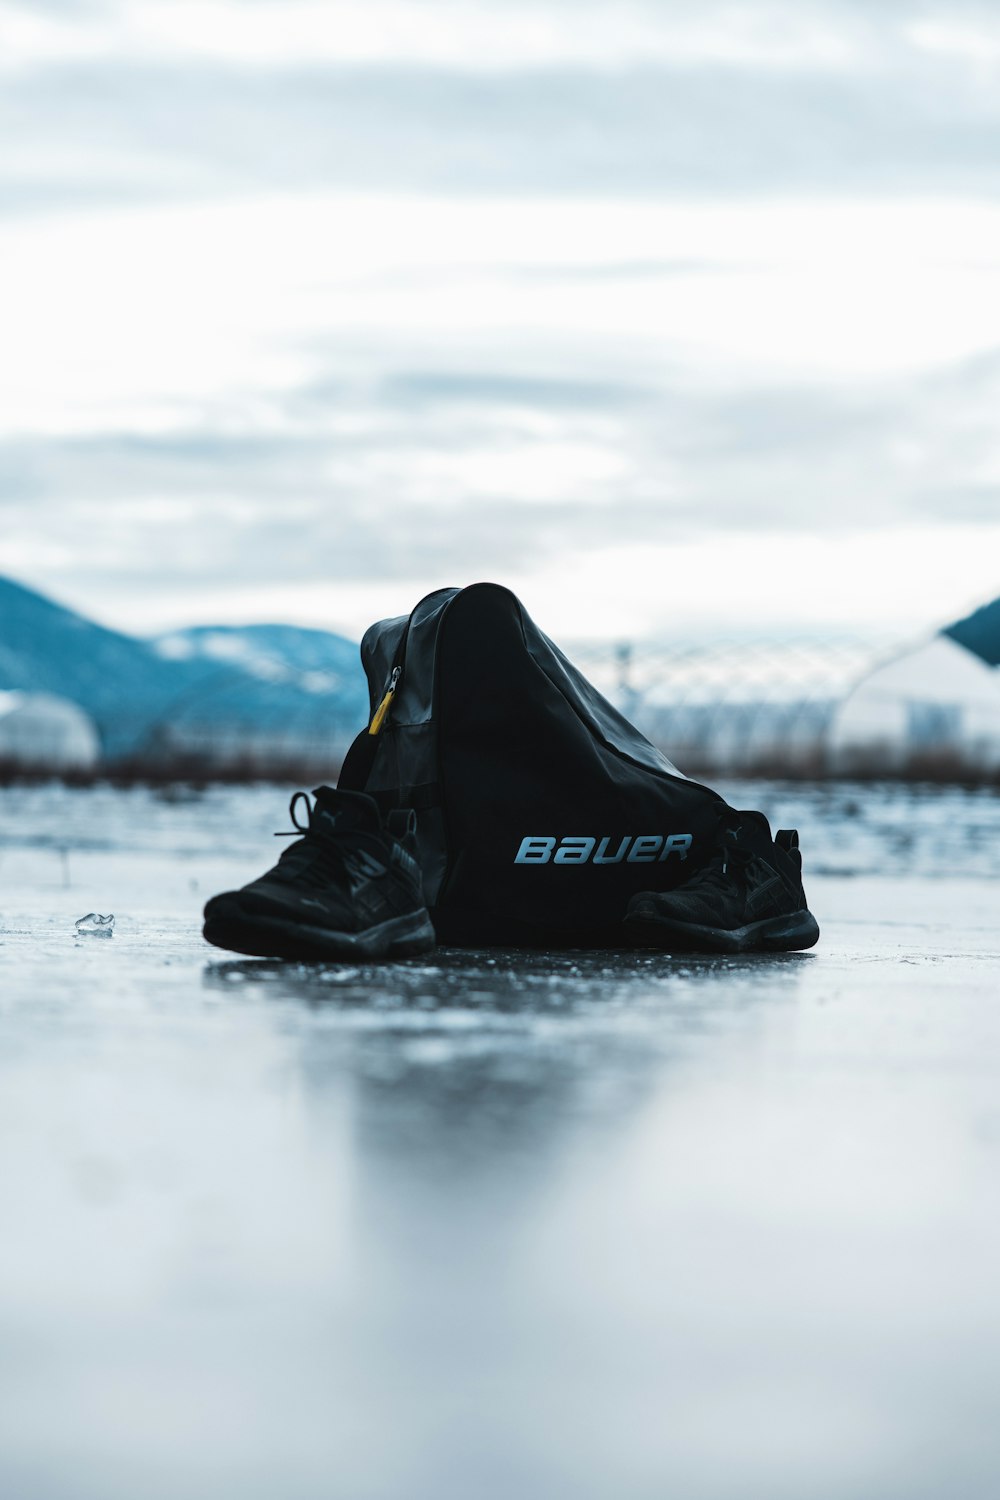 a pair of black shoes sitting on top of an ice covered ground